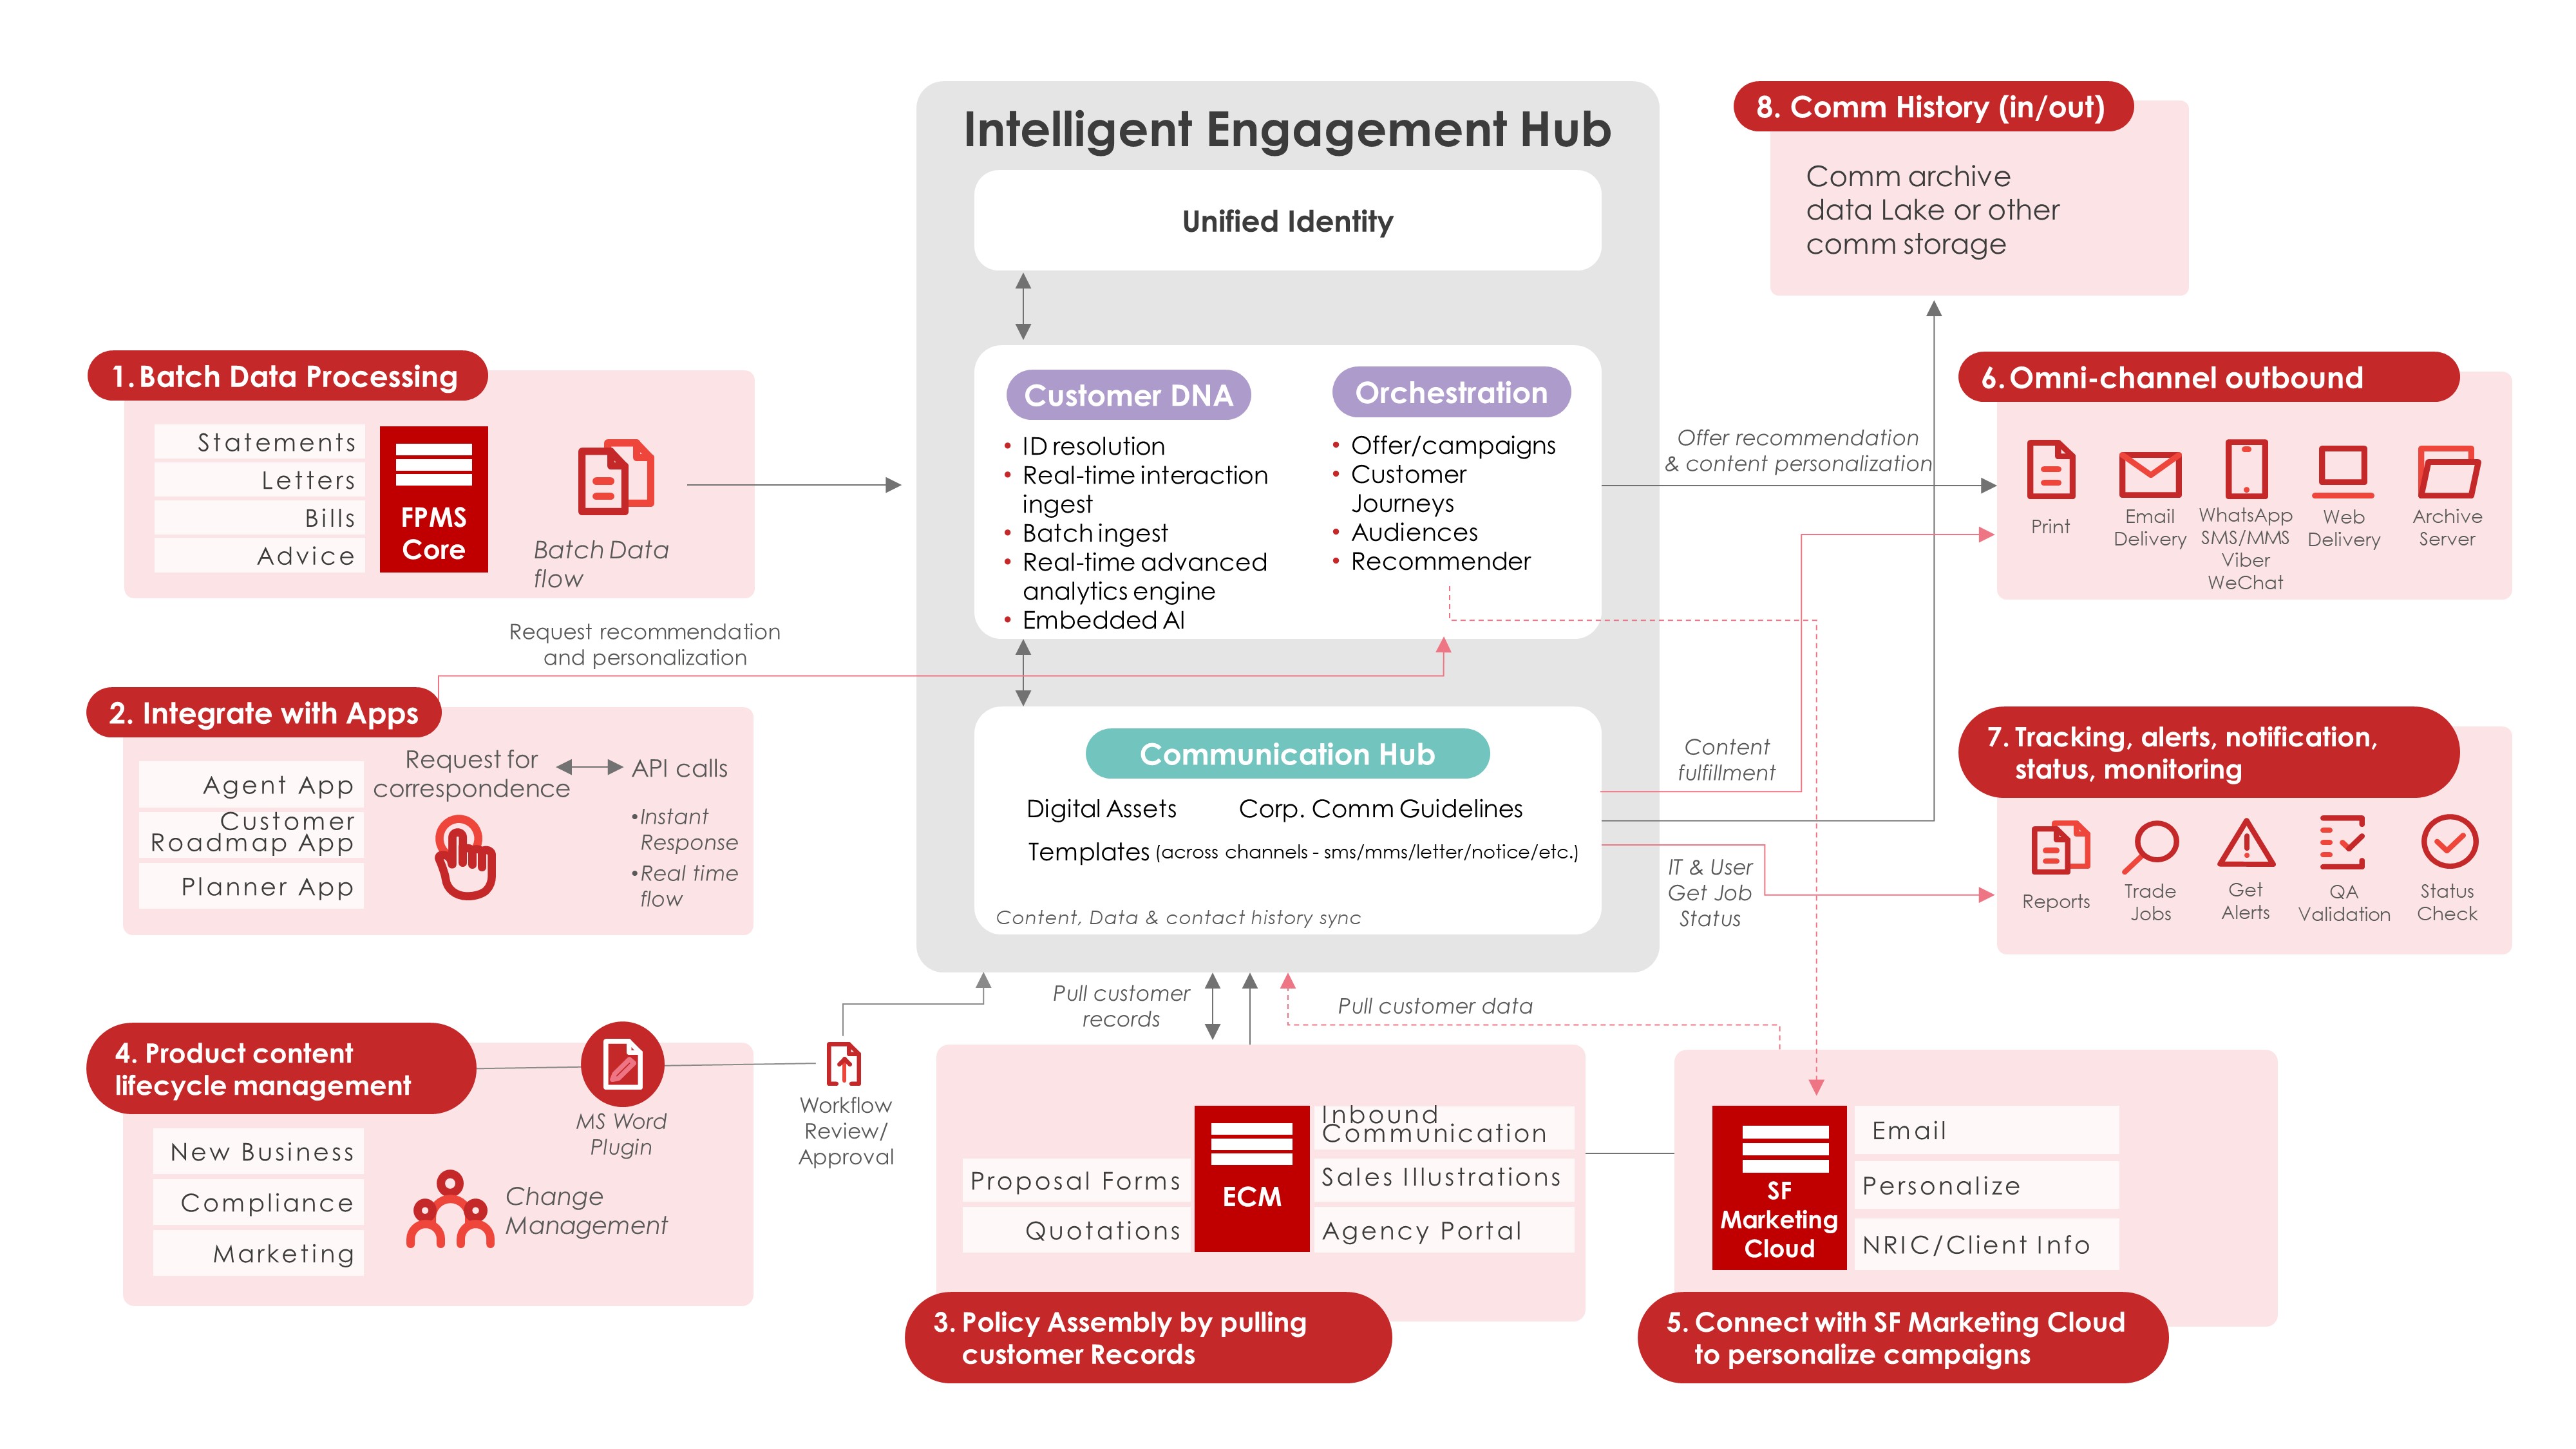 Flow and design of the Intelligent Engagement Hub